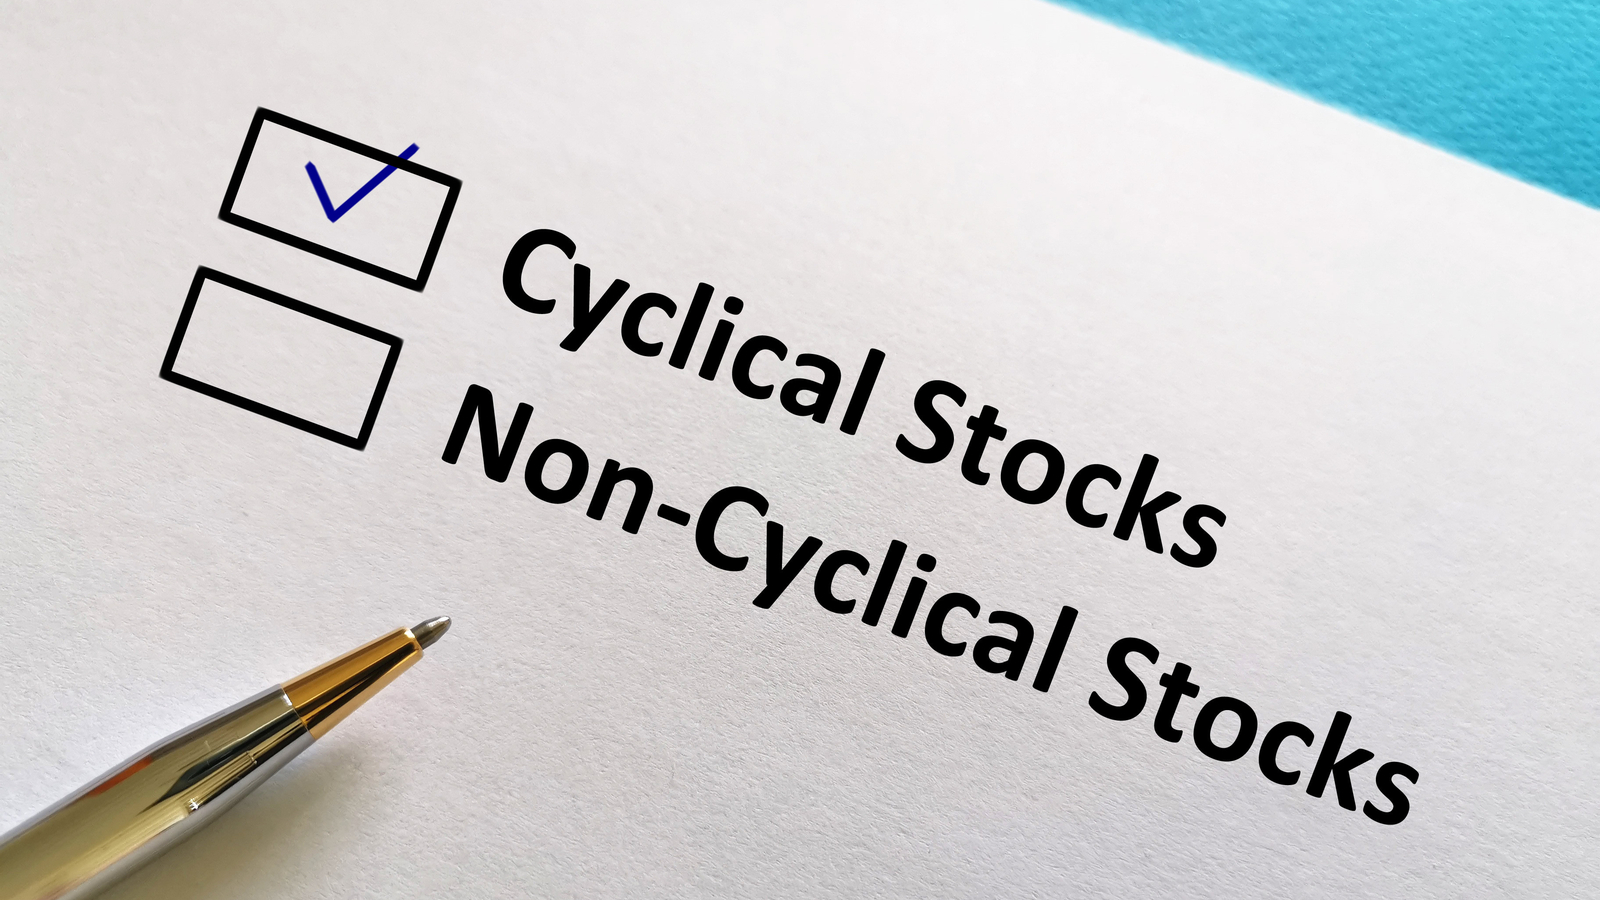 The phrases 'Cyclical Stocks' and 'Non-Cyclical Stocks' are printed on a piece of paper with boxes next to them. A check mark has been drawn in the Cyclical Stocks box, and a pen rests on the paper.